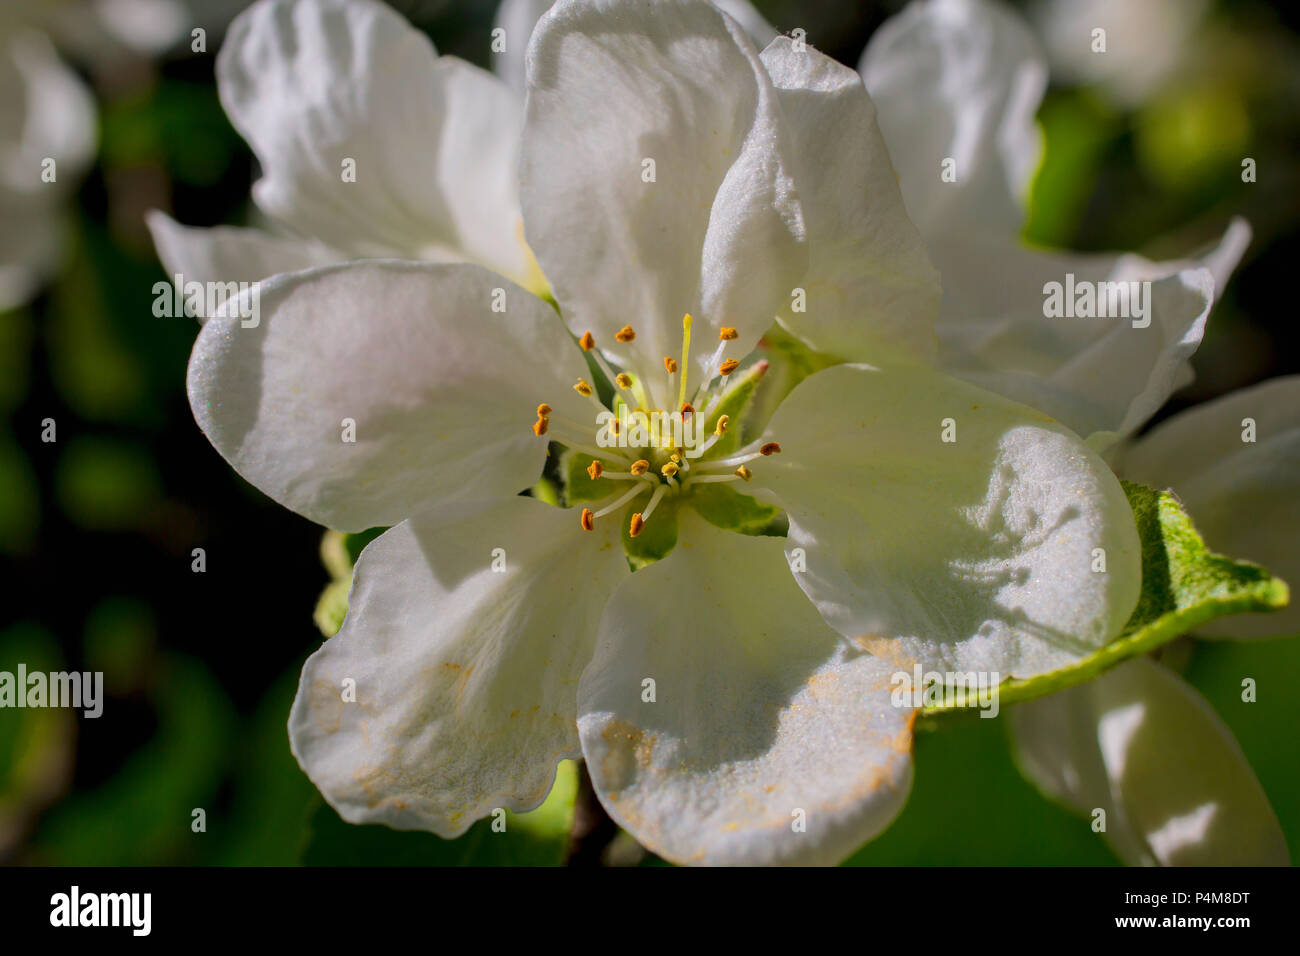 Apple Blossoms, Eastern Townships, Iron hill, Quebec, Canada Stock Photo